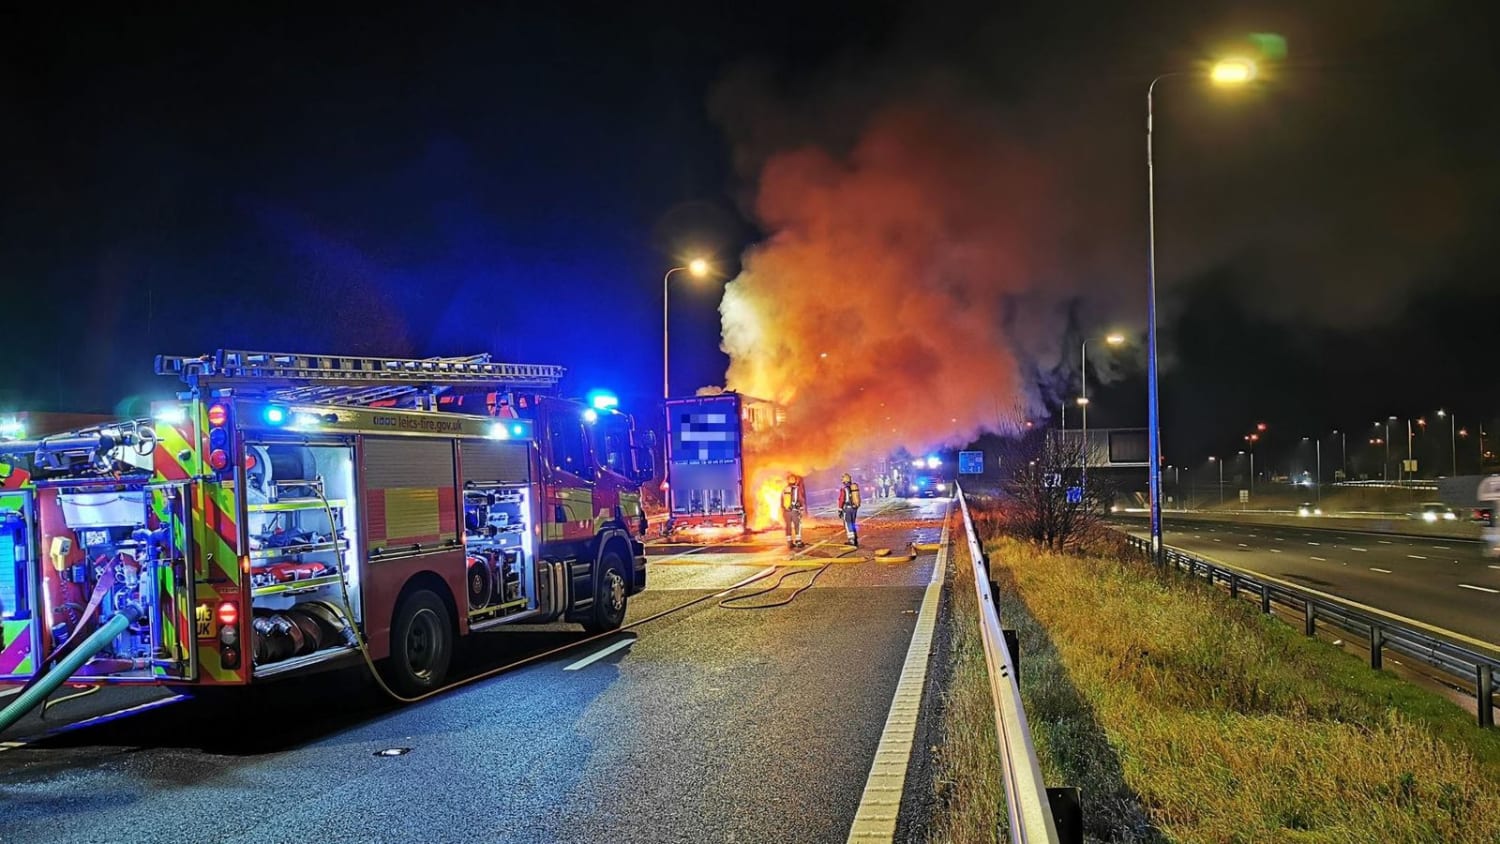 Burnt to a crisp: Lorry carrying Pringles catches fire on M1